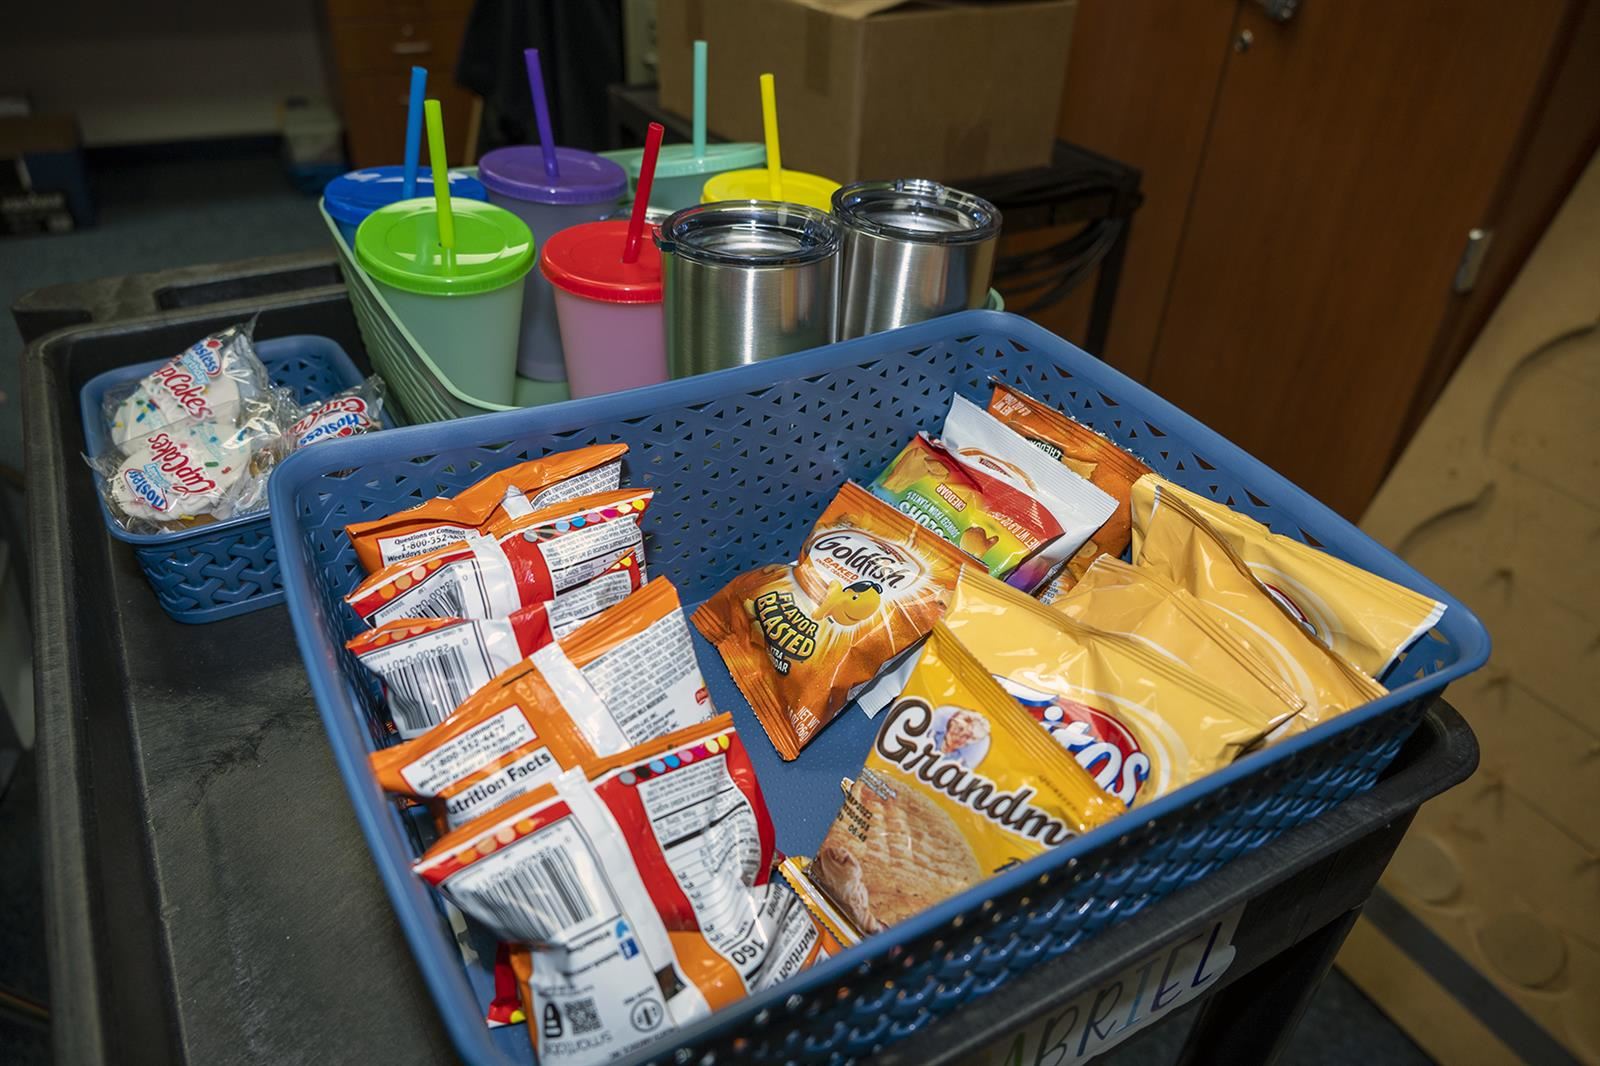 Students could use money earned during class to spend at a store created that included snacks and donated items such tumblers